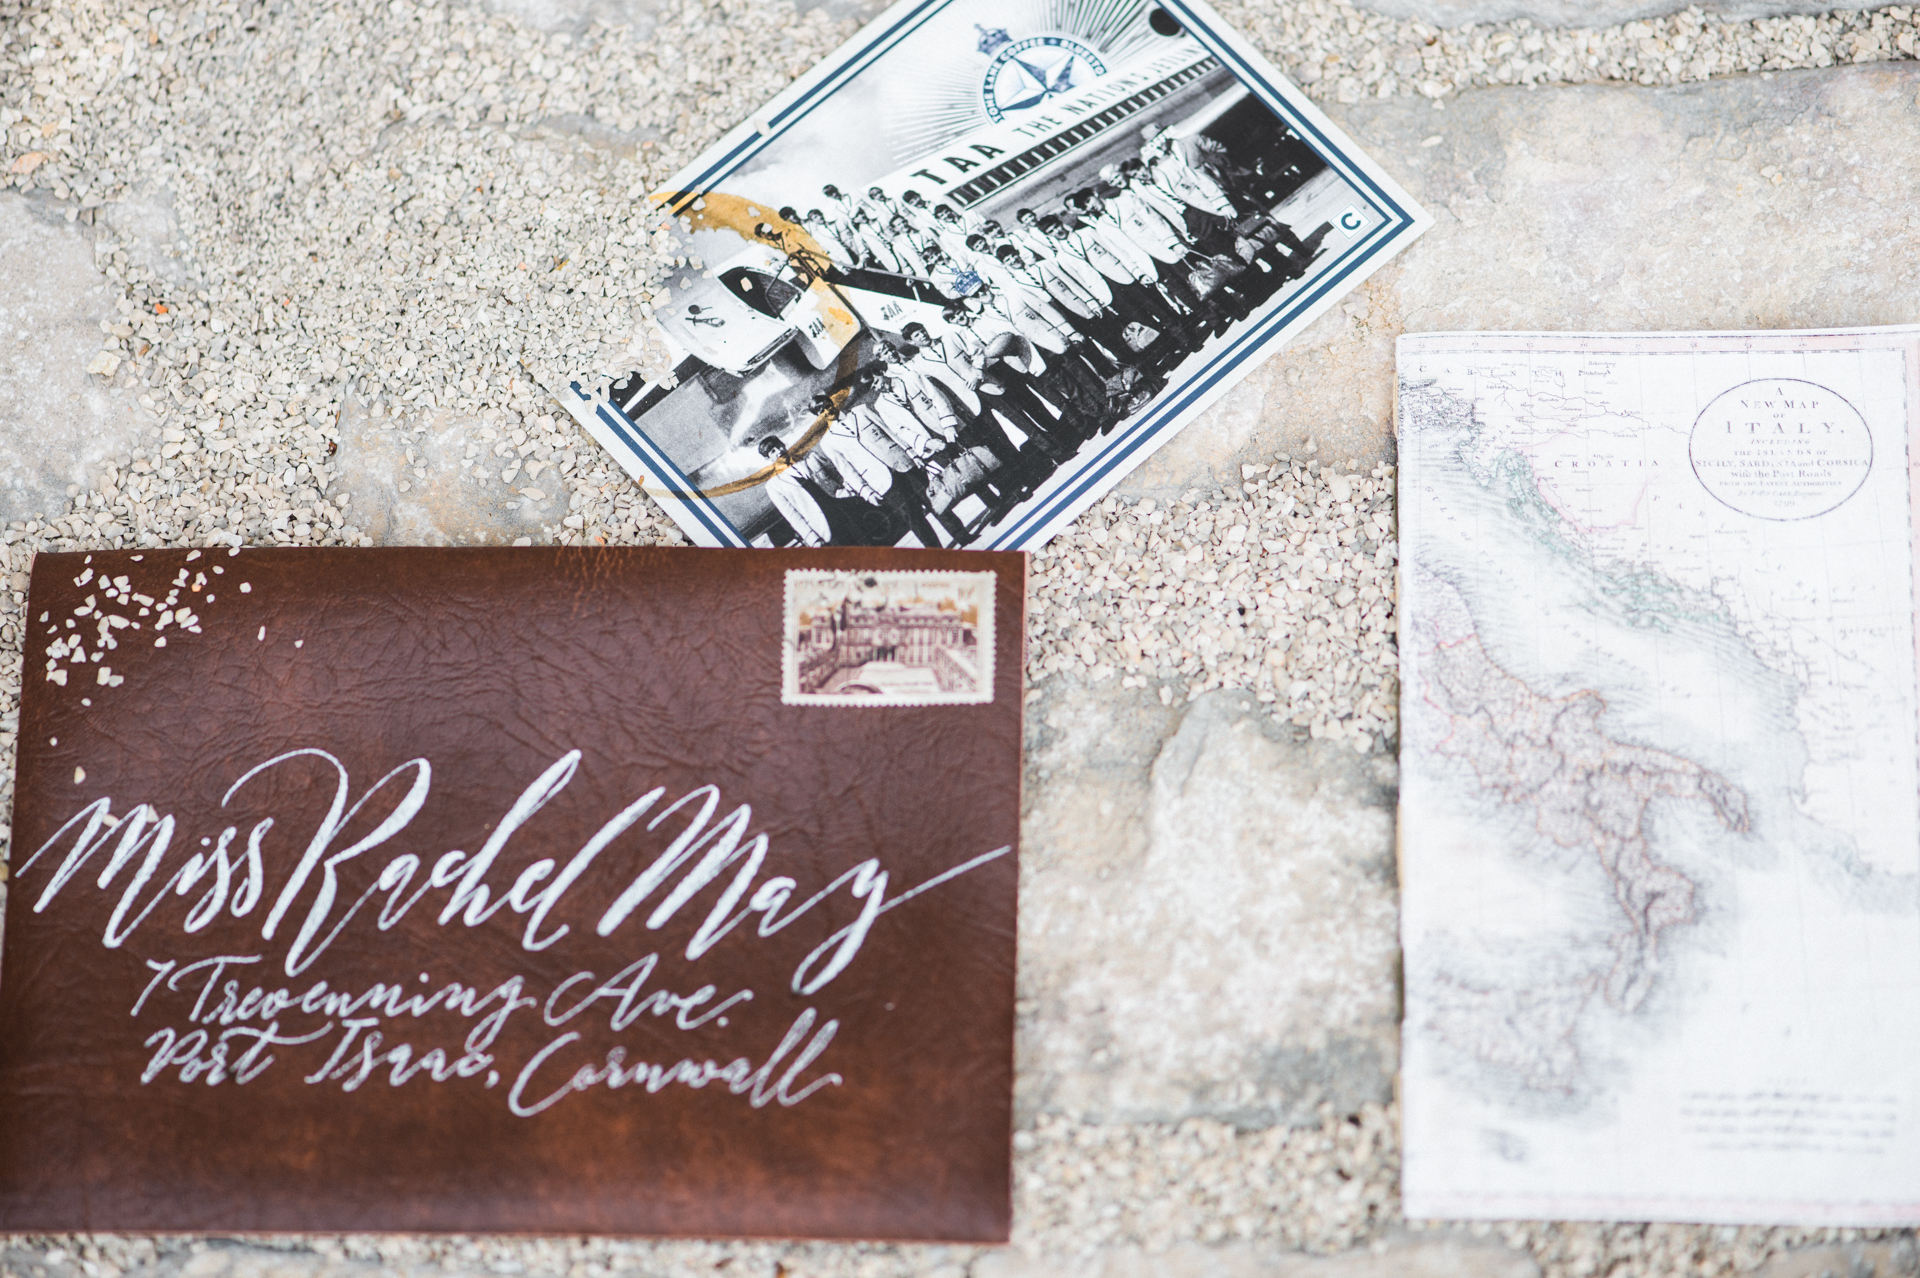 A faux leather envelope with handwritten modern calligraphy. The envelope is shown next to a vintage photo of men in suits lined up next to a plane, and a vintage map of Italy. Sand is scattered across the shot.